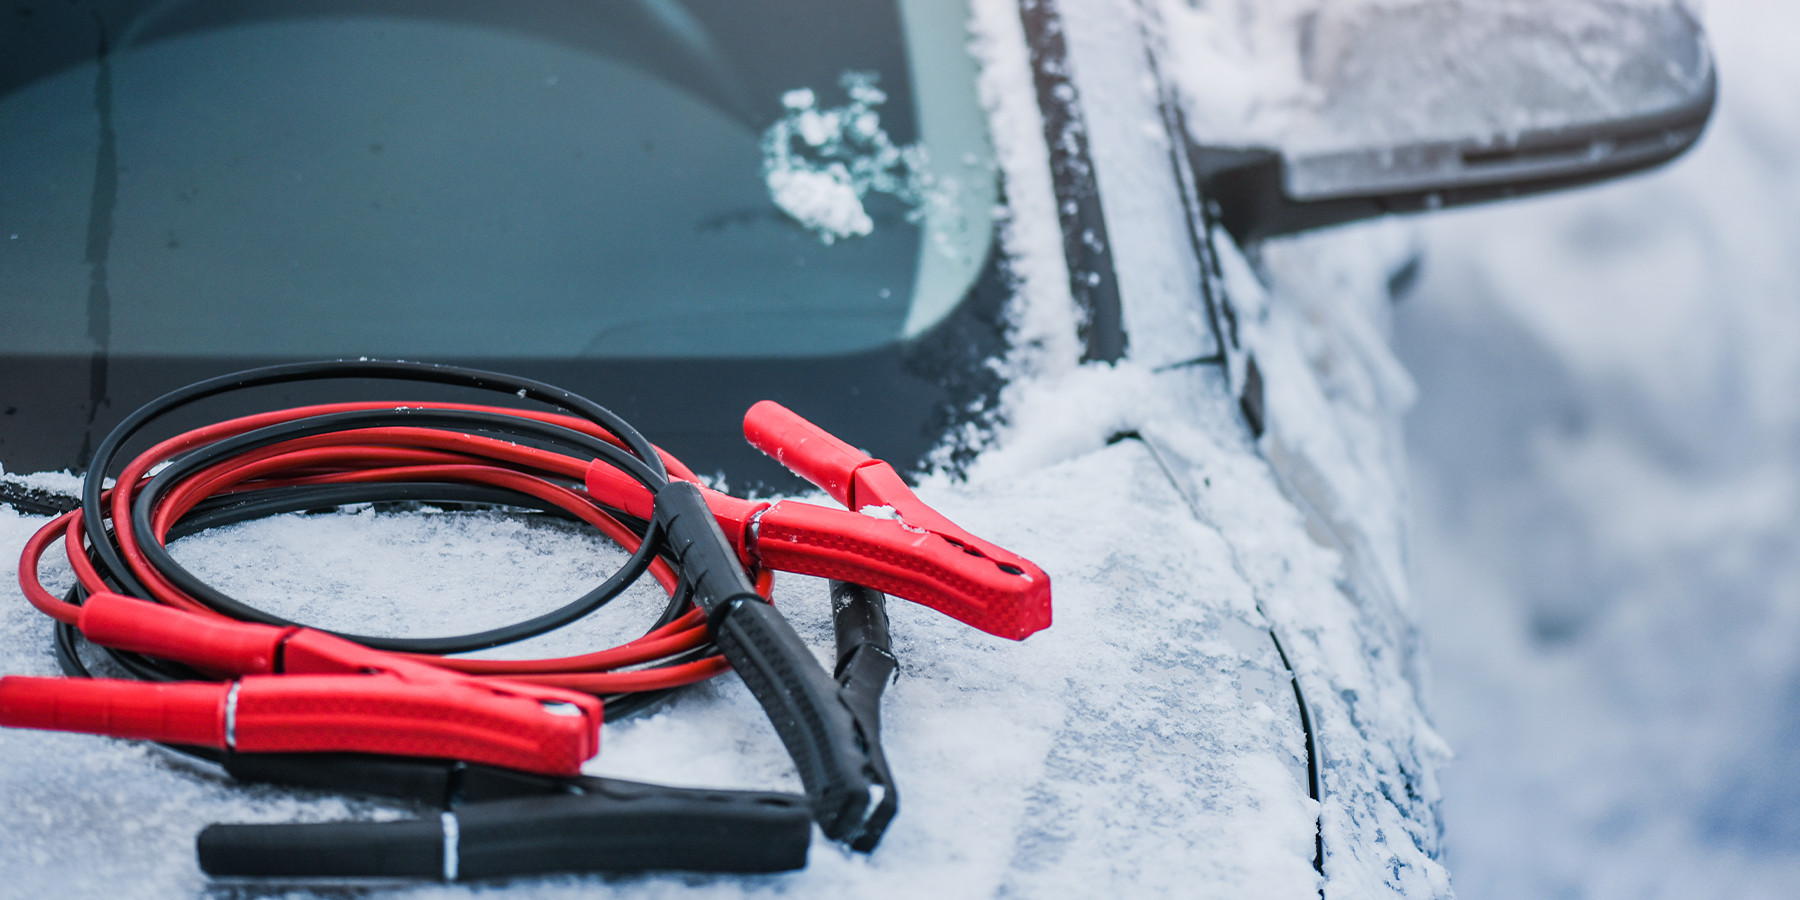 How To Boost a Car Battery With Booster Cables - Tow Truck